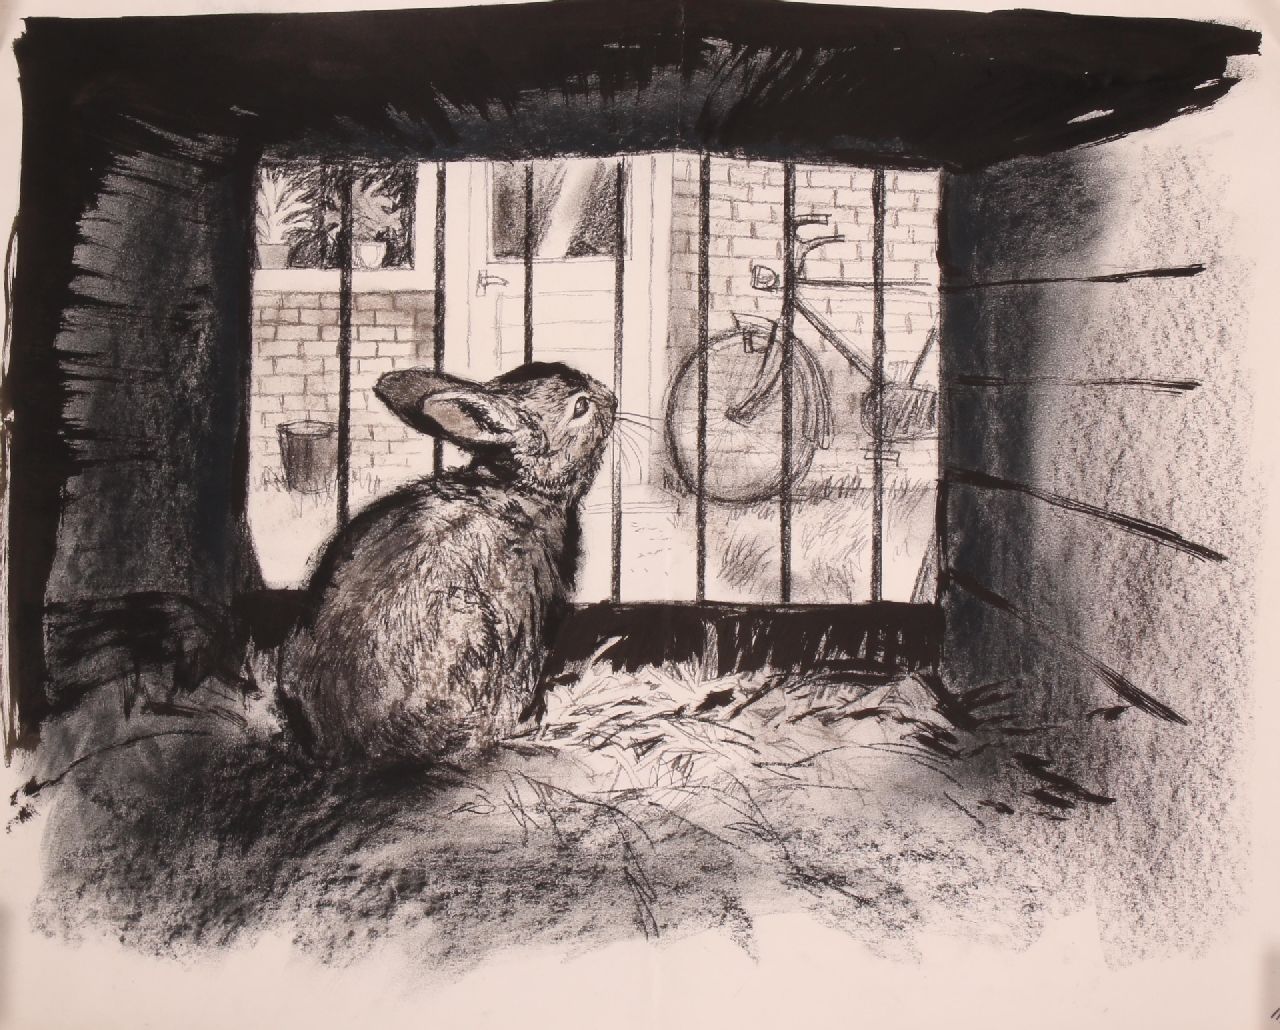 Poortvliet R.  | Rien Poortvliet | Watercolours and drawings offered for sale | Rabbit in cage, charcoal and ink on paper 50.0 x 64.8 cm, zonder lijst